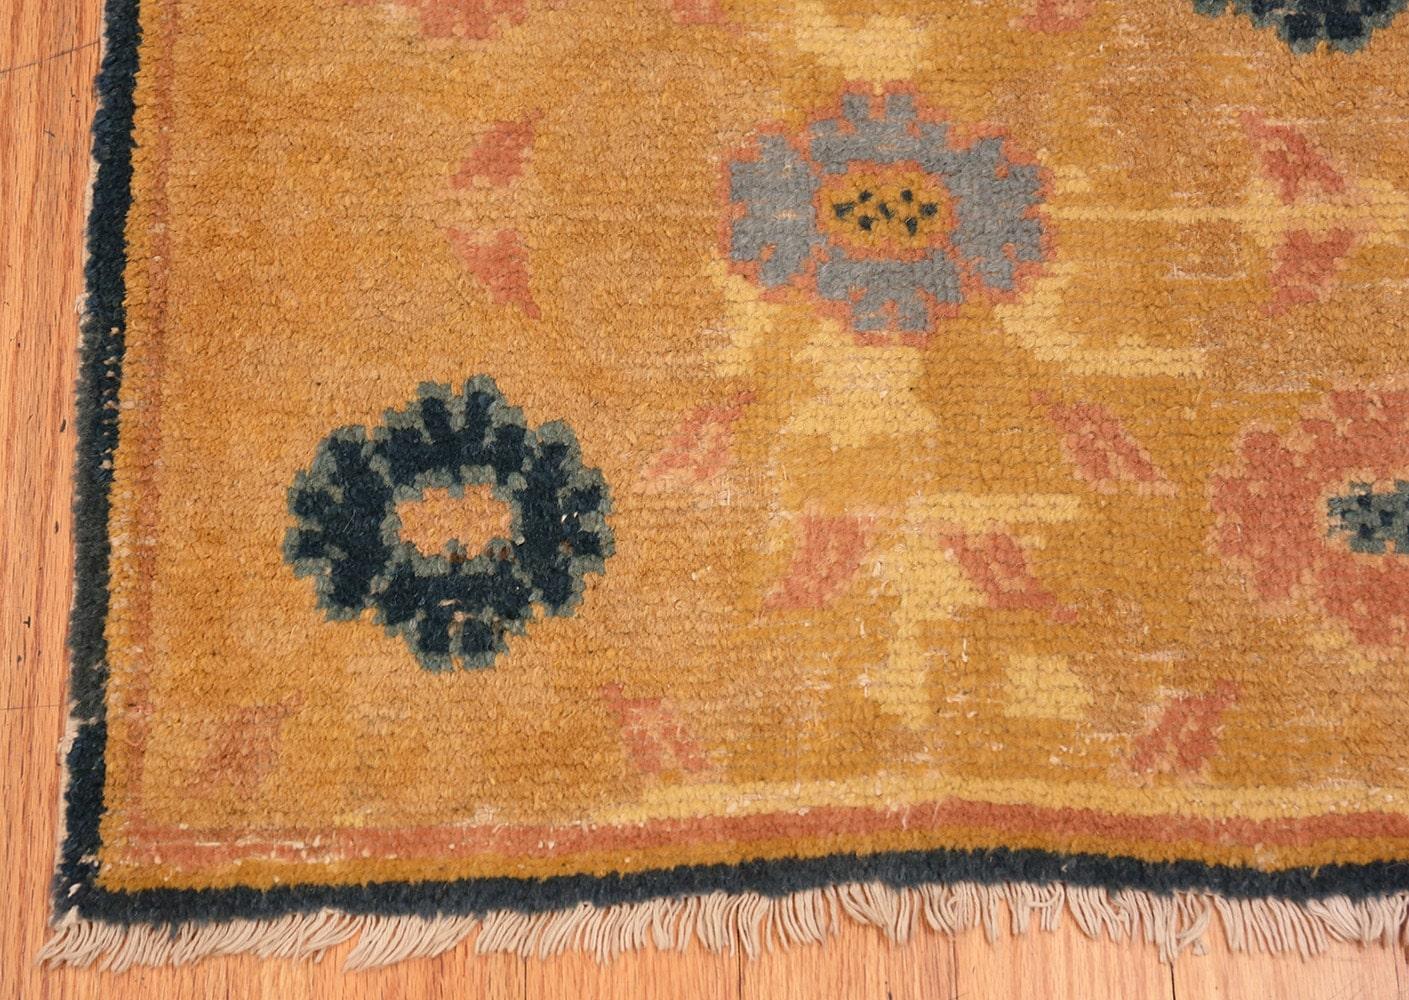 Antique Chinese rug, country of origin: China, date: circa 1800. Size: 2 ft 3 in x 3 ft 9 in (0.69 m x 1.14 m). 

This antique Chinese rug is quite the wonderful piece. This beautiful example possesses many of those qualities and characteristics